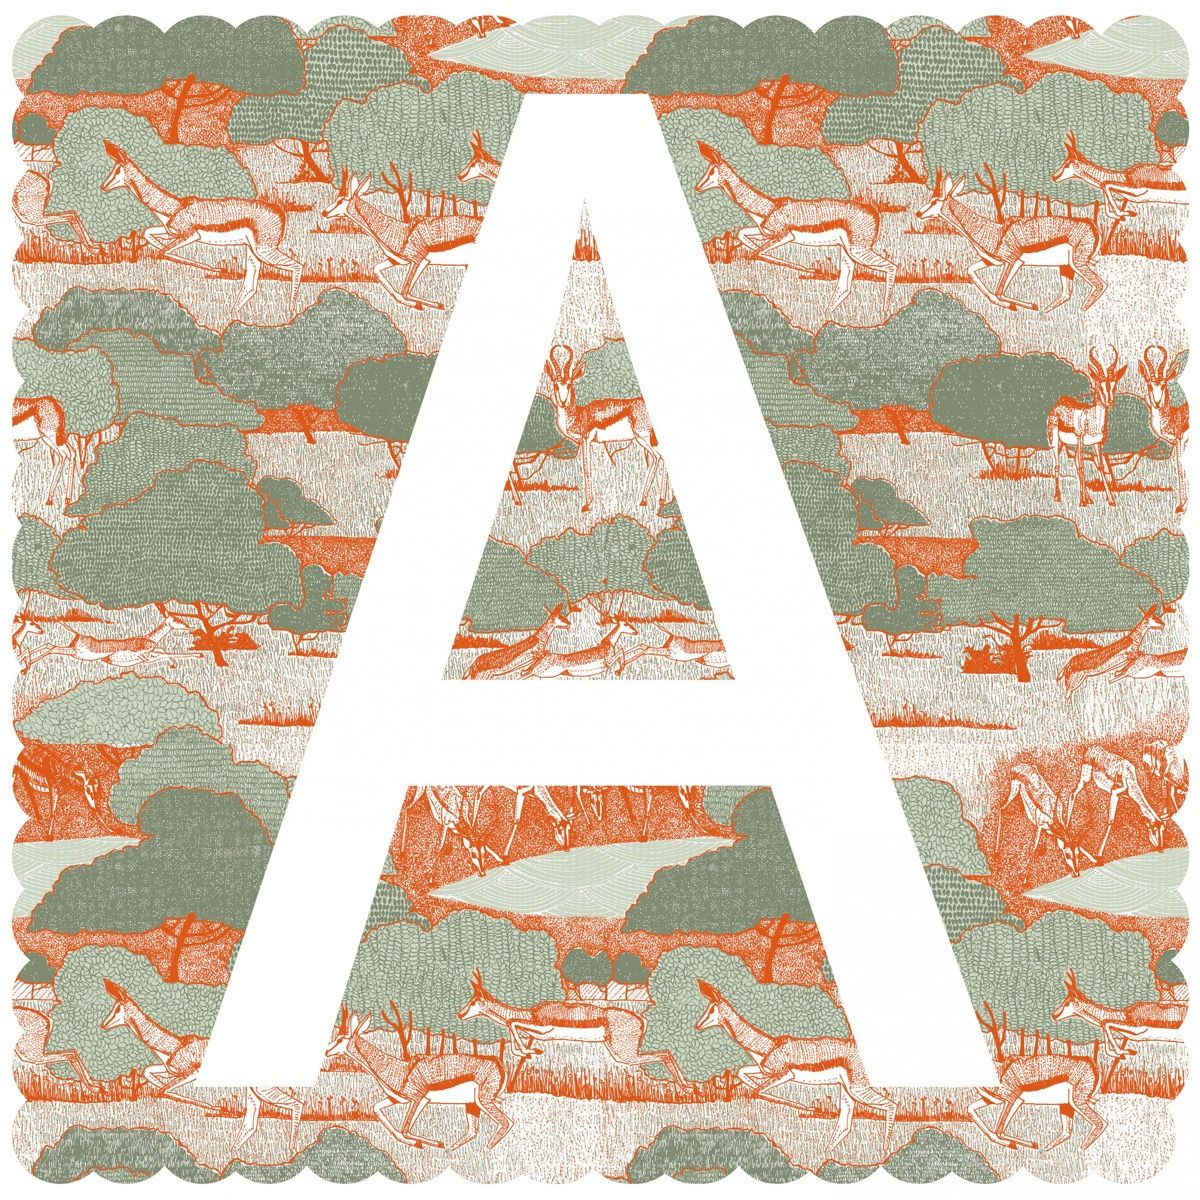 A is for Antelope (Large) by Clare Halifax